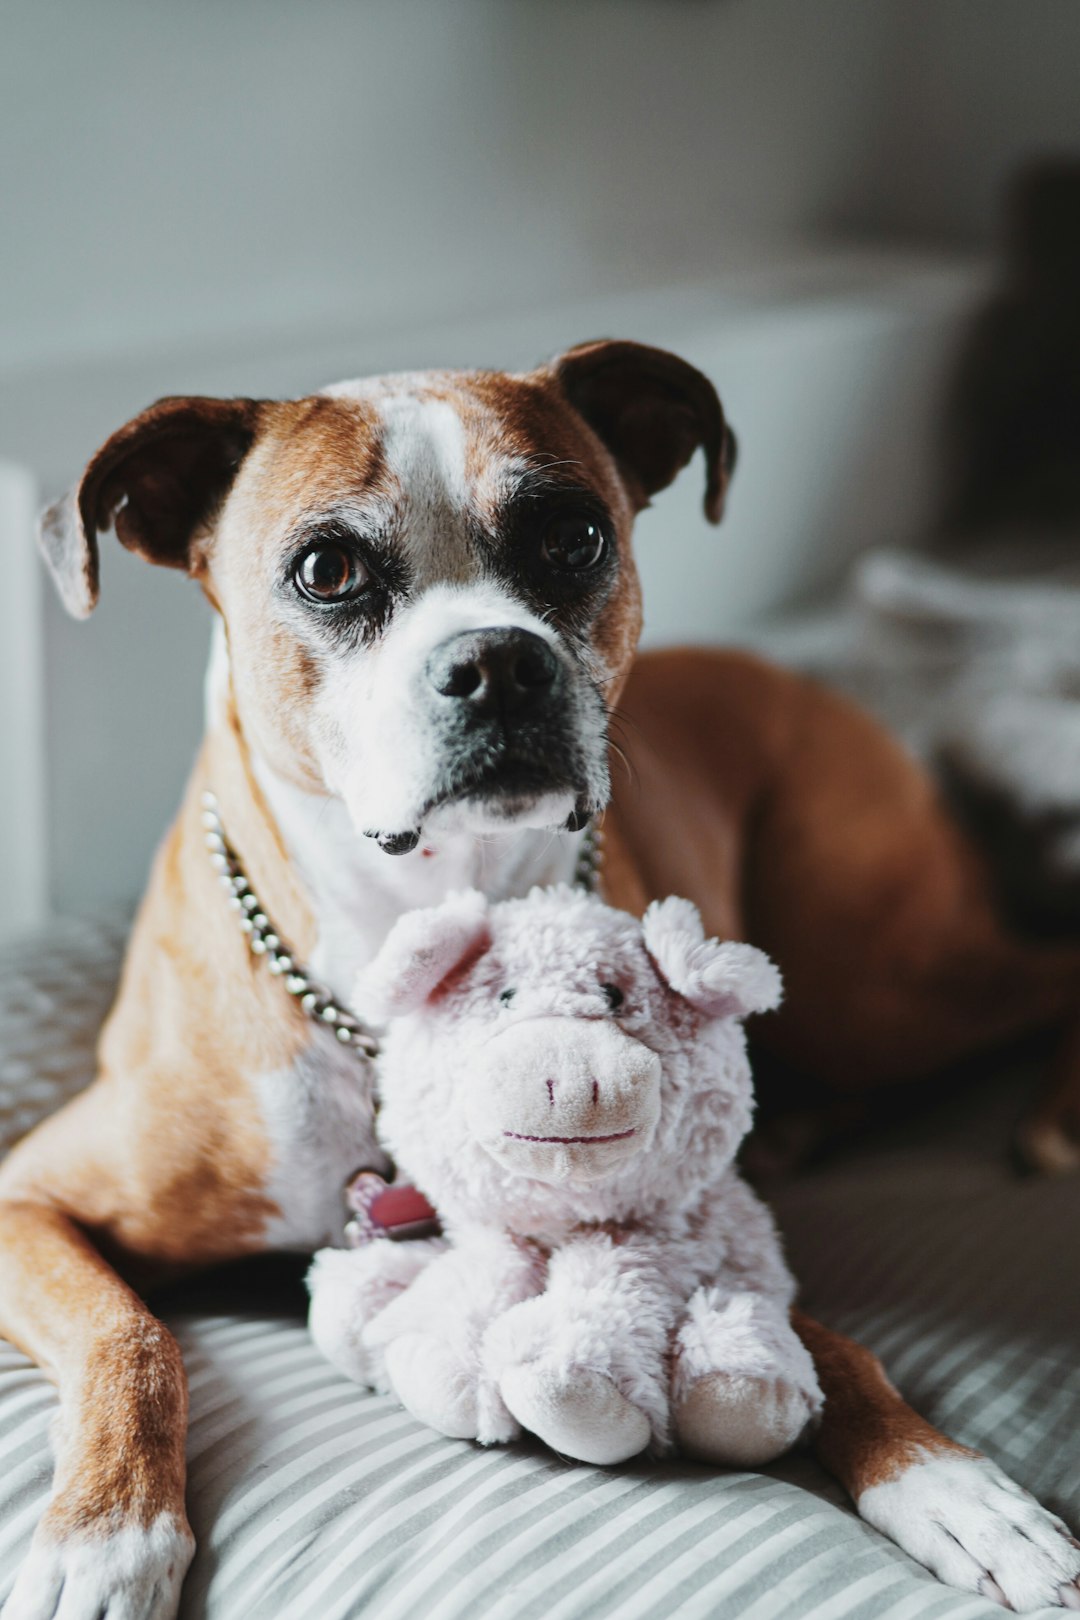 brown and white short coated dog with white and pink plush toy